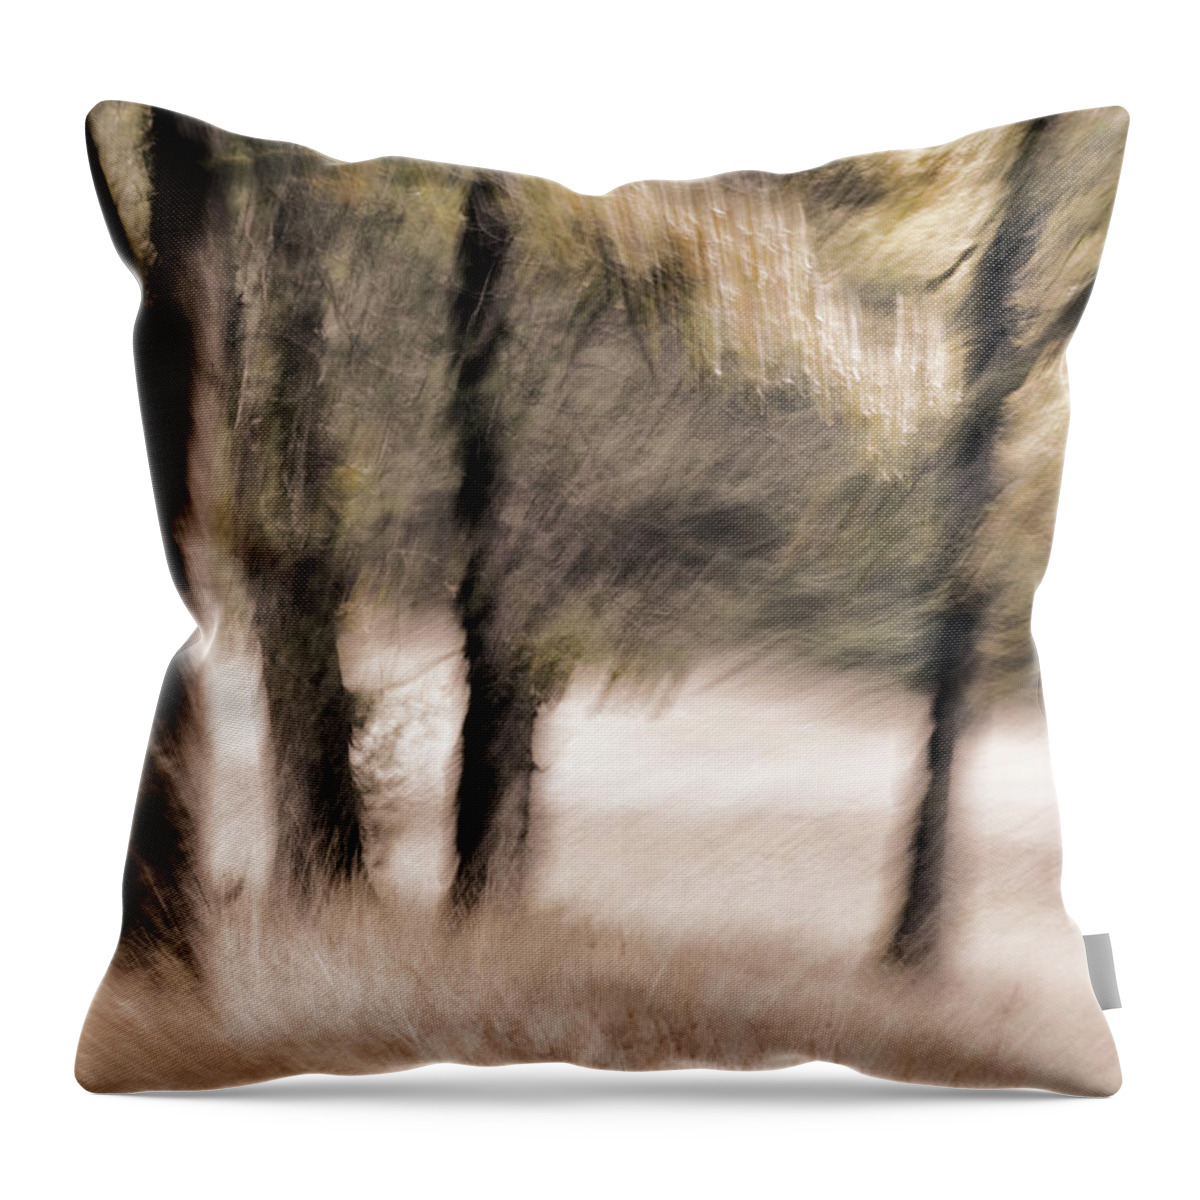 Trees Throw Pillow featuring the photograph Passing by Trees by Carol Leigh